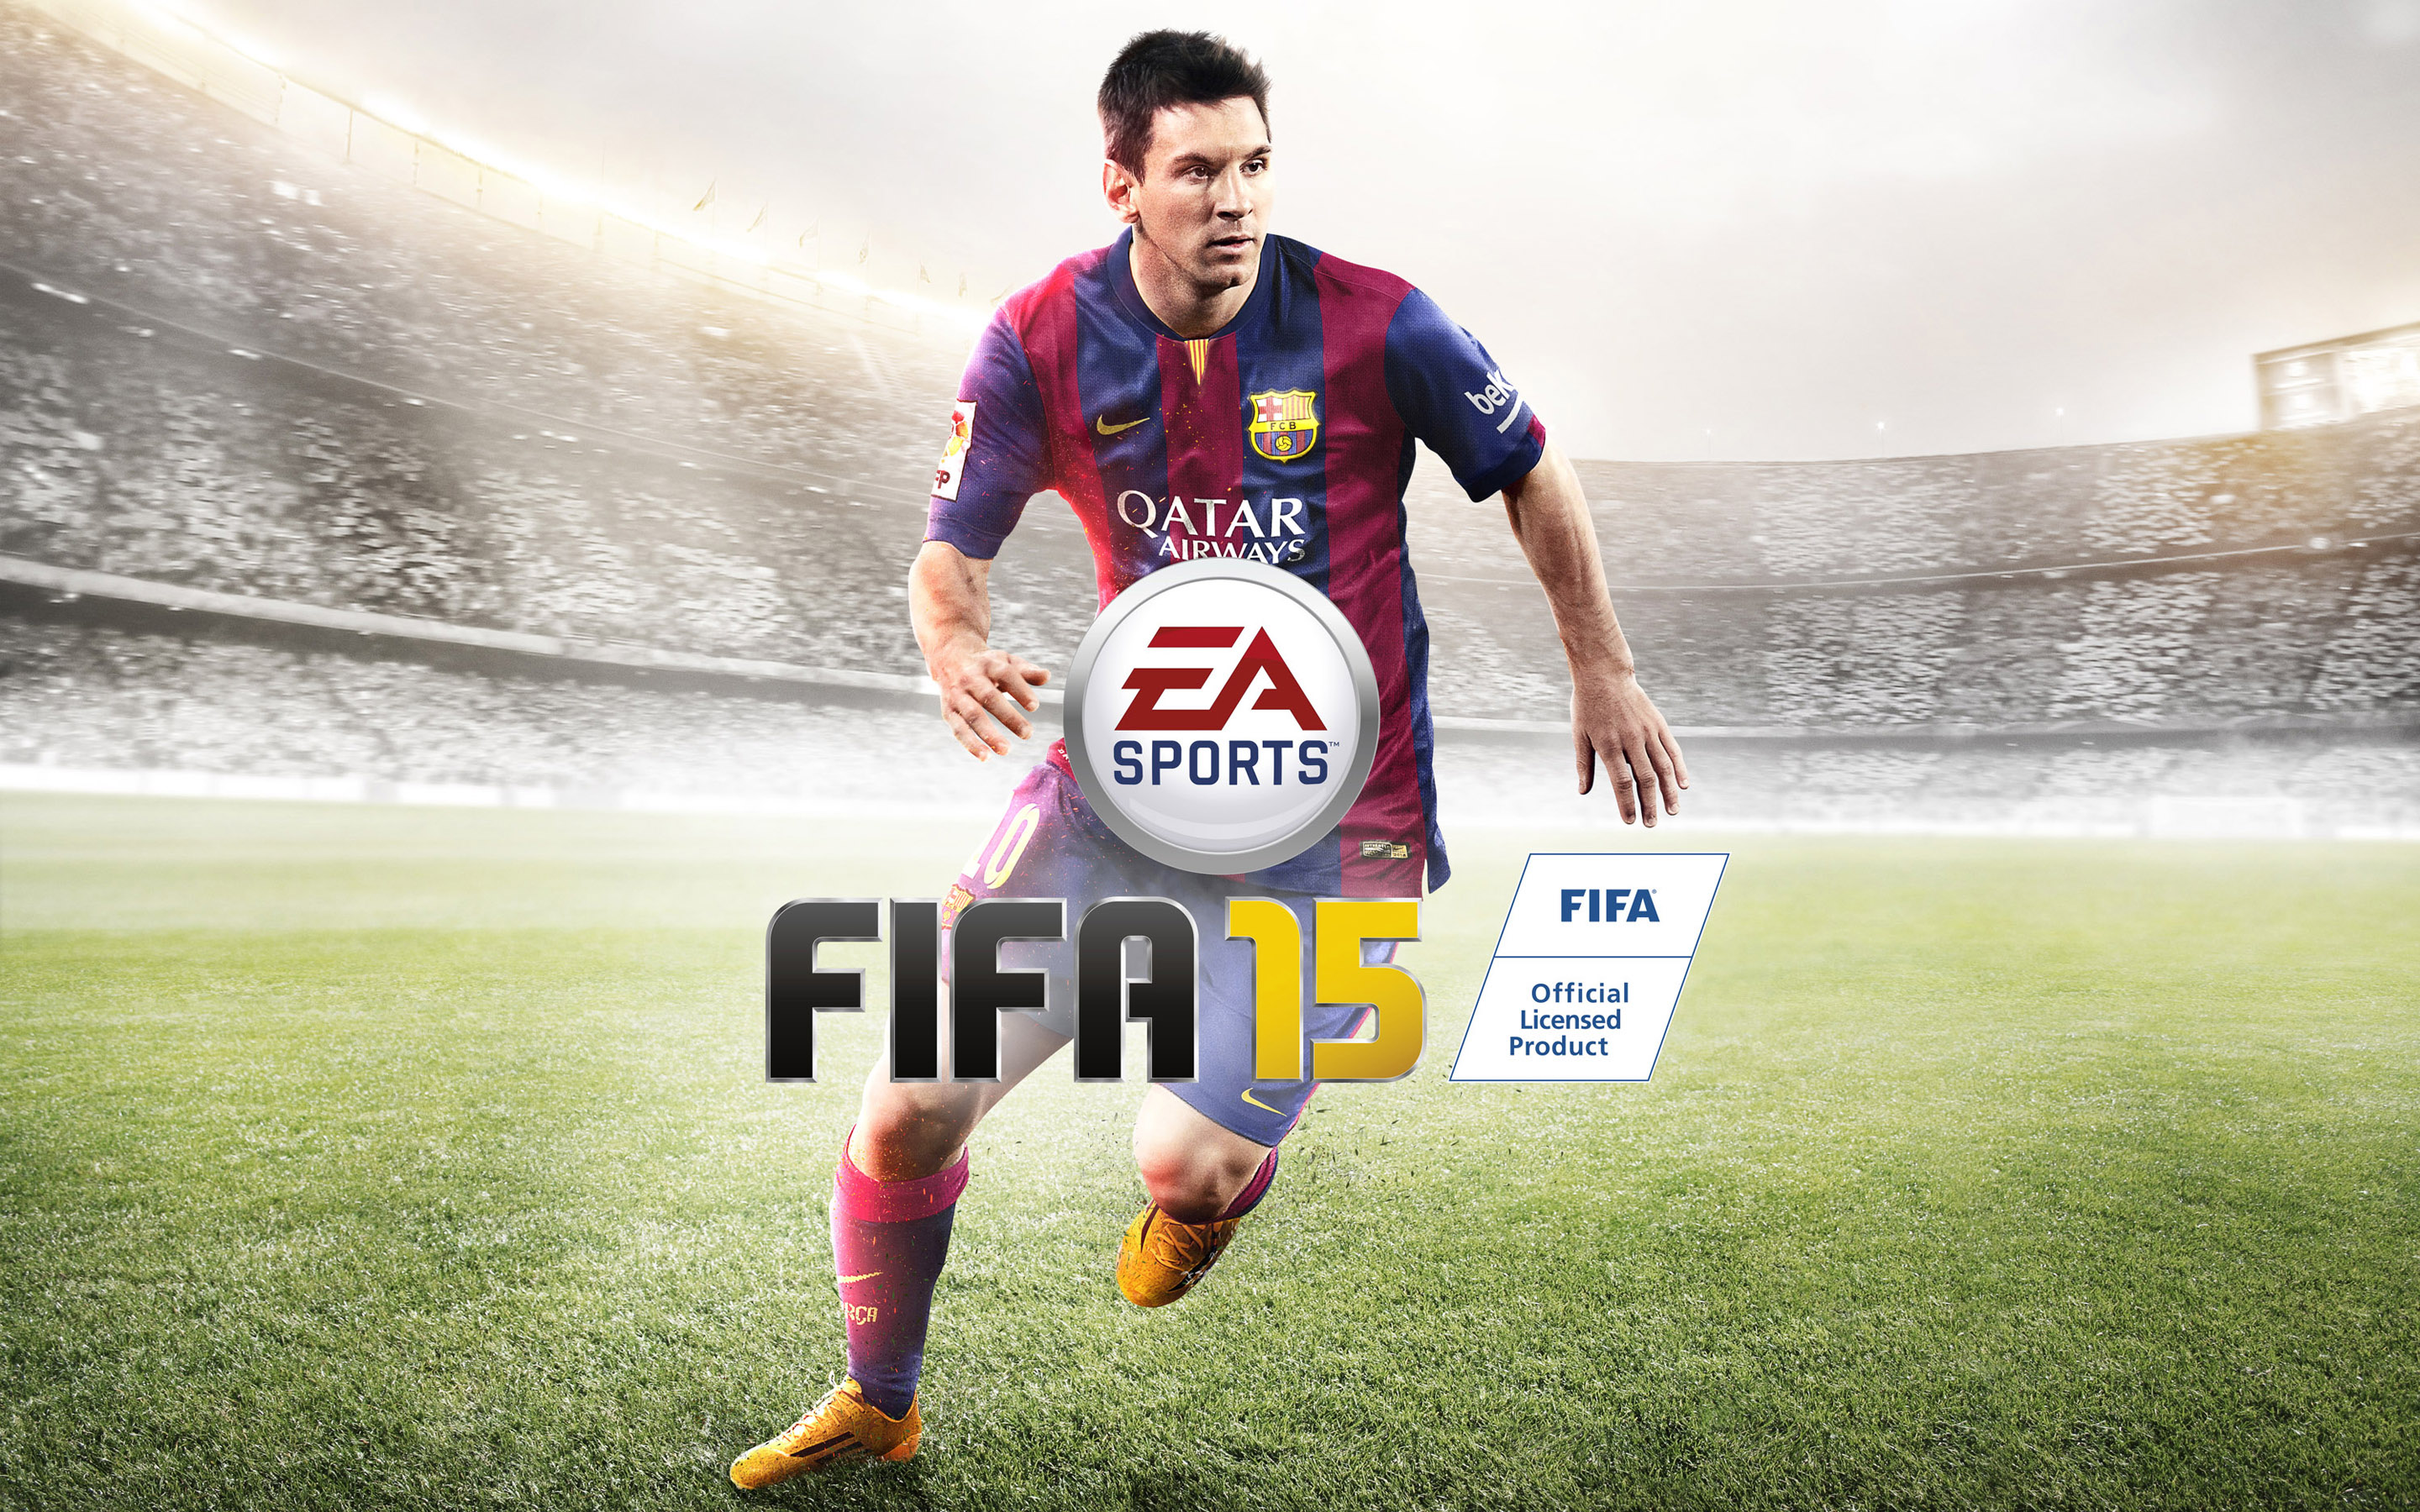 download fifa 2015 pc for free